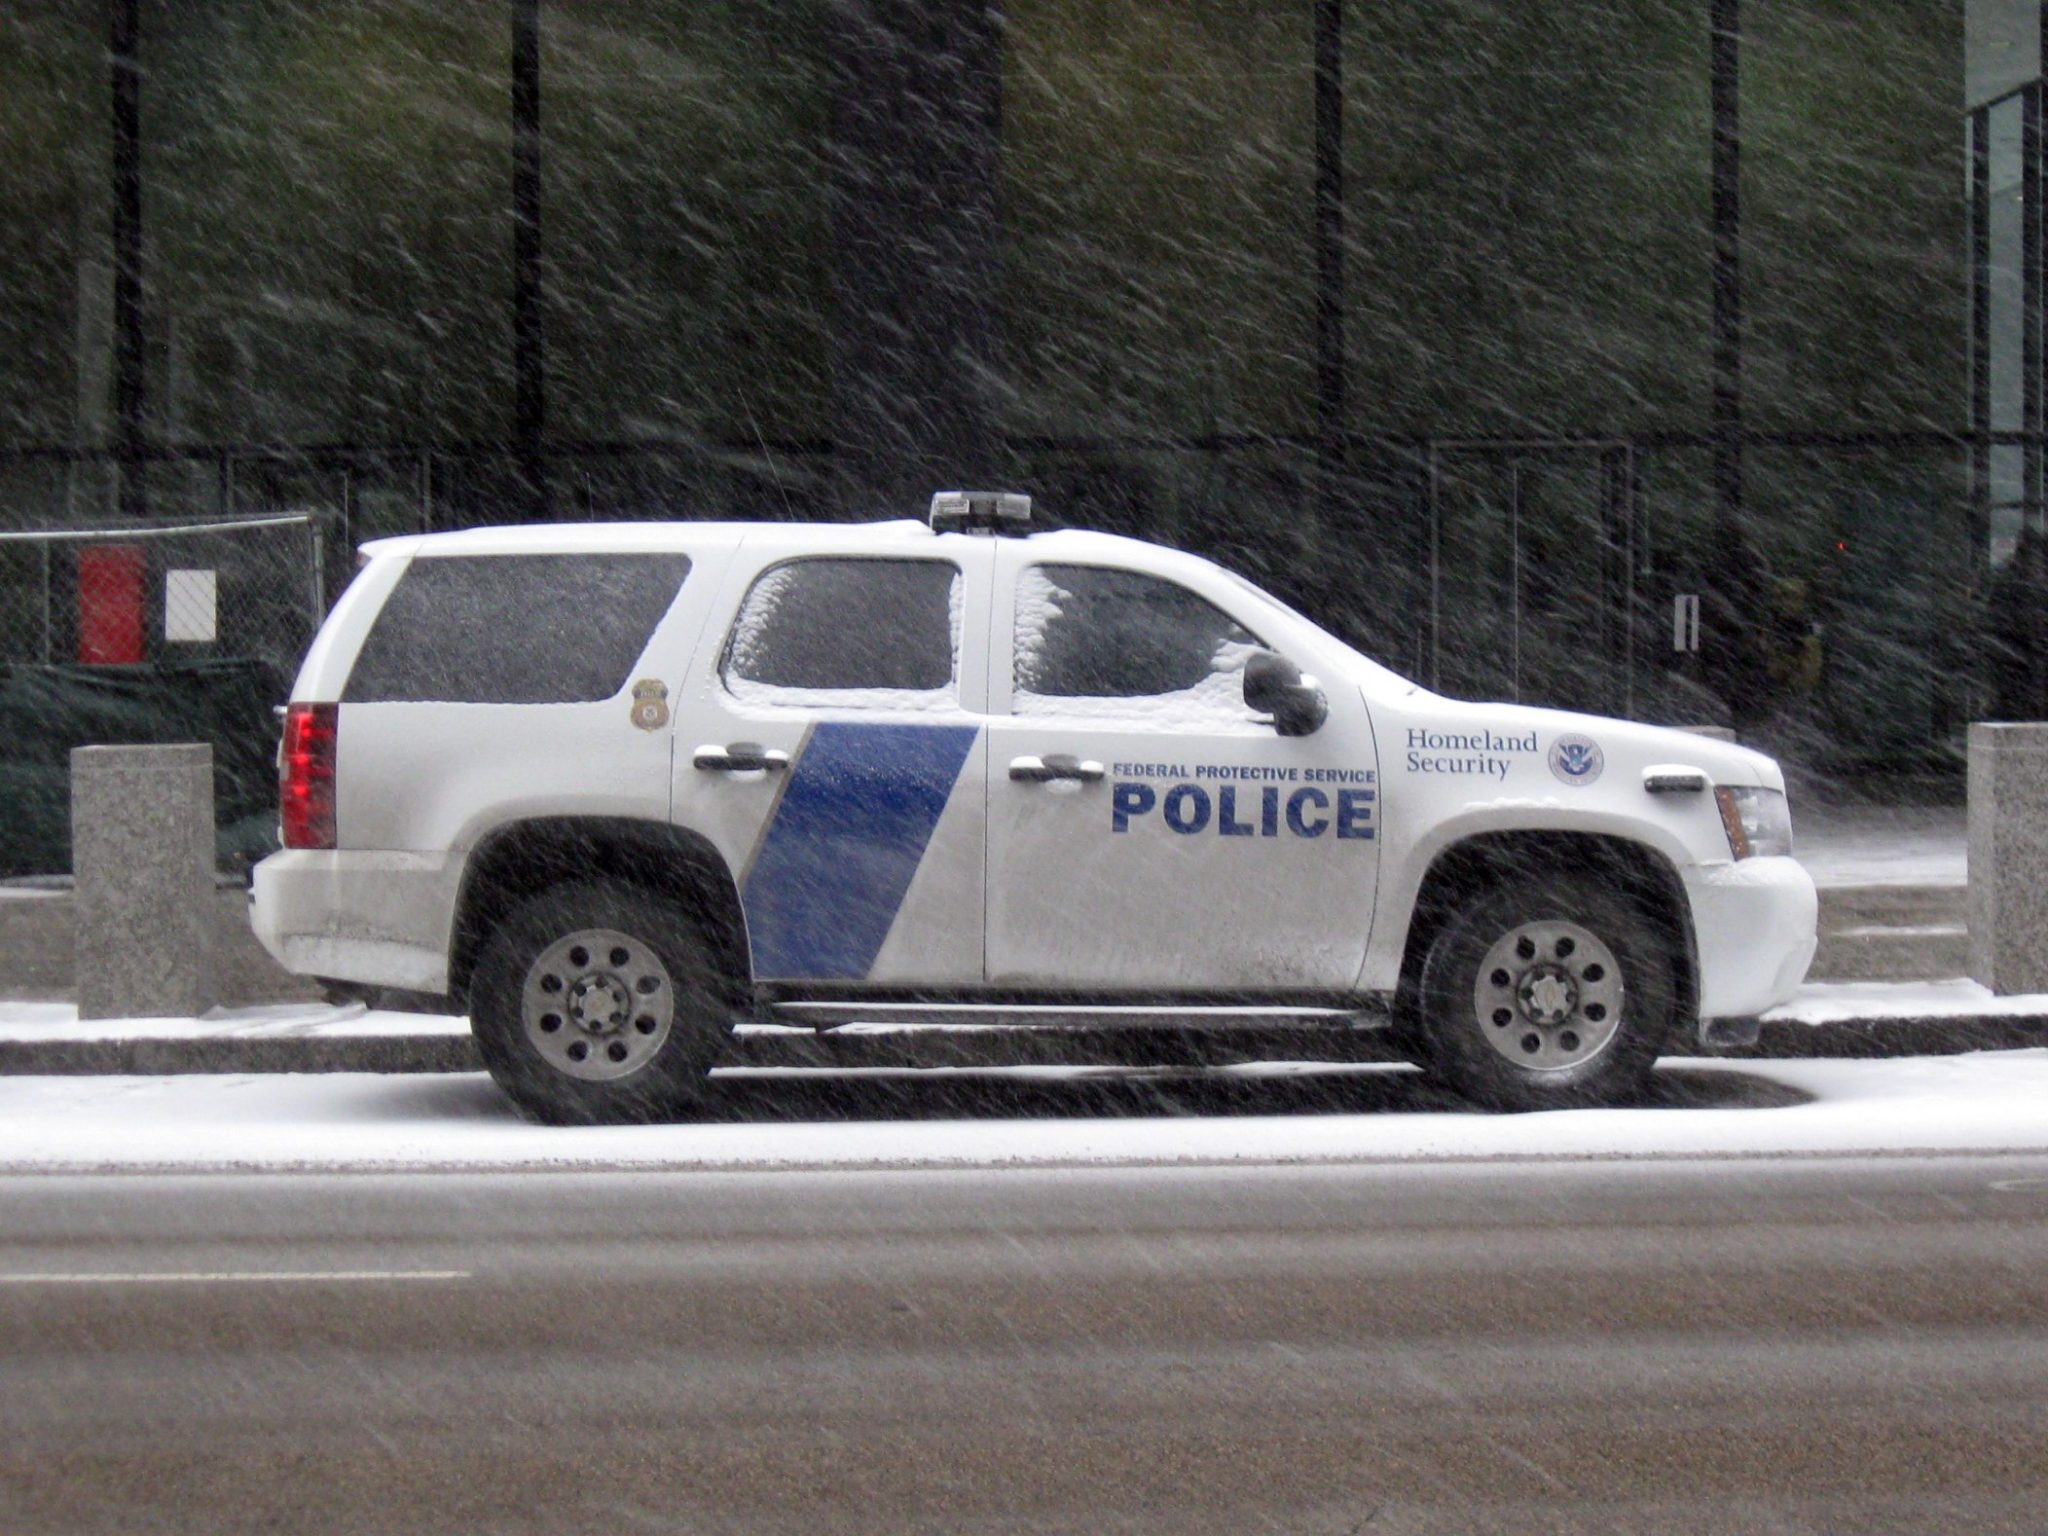 FED - Federal Protective Service Police Department